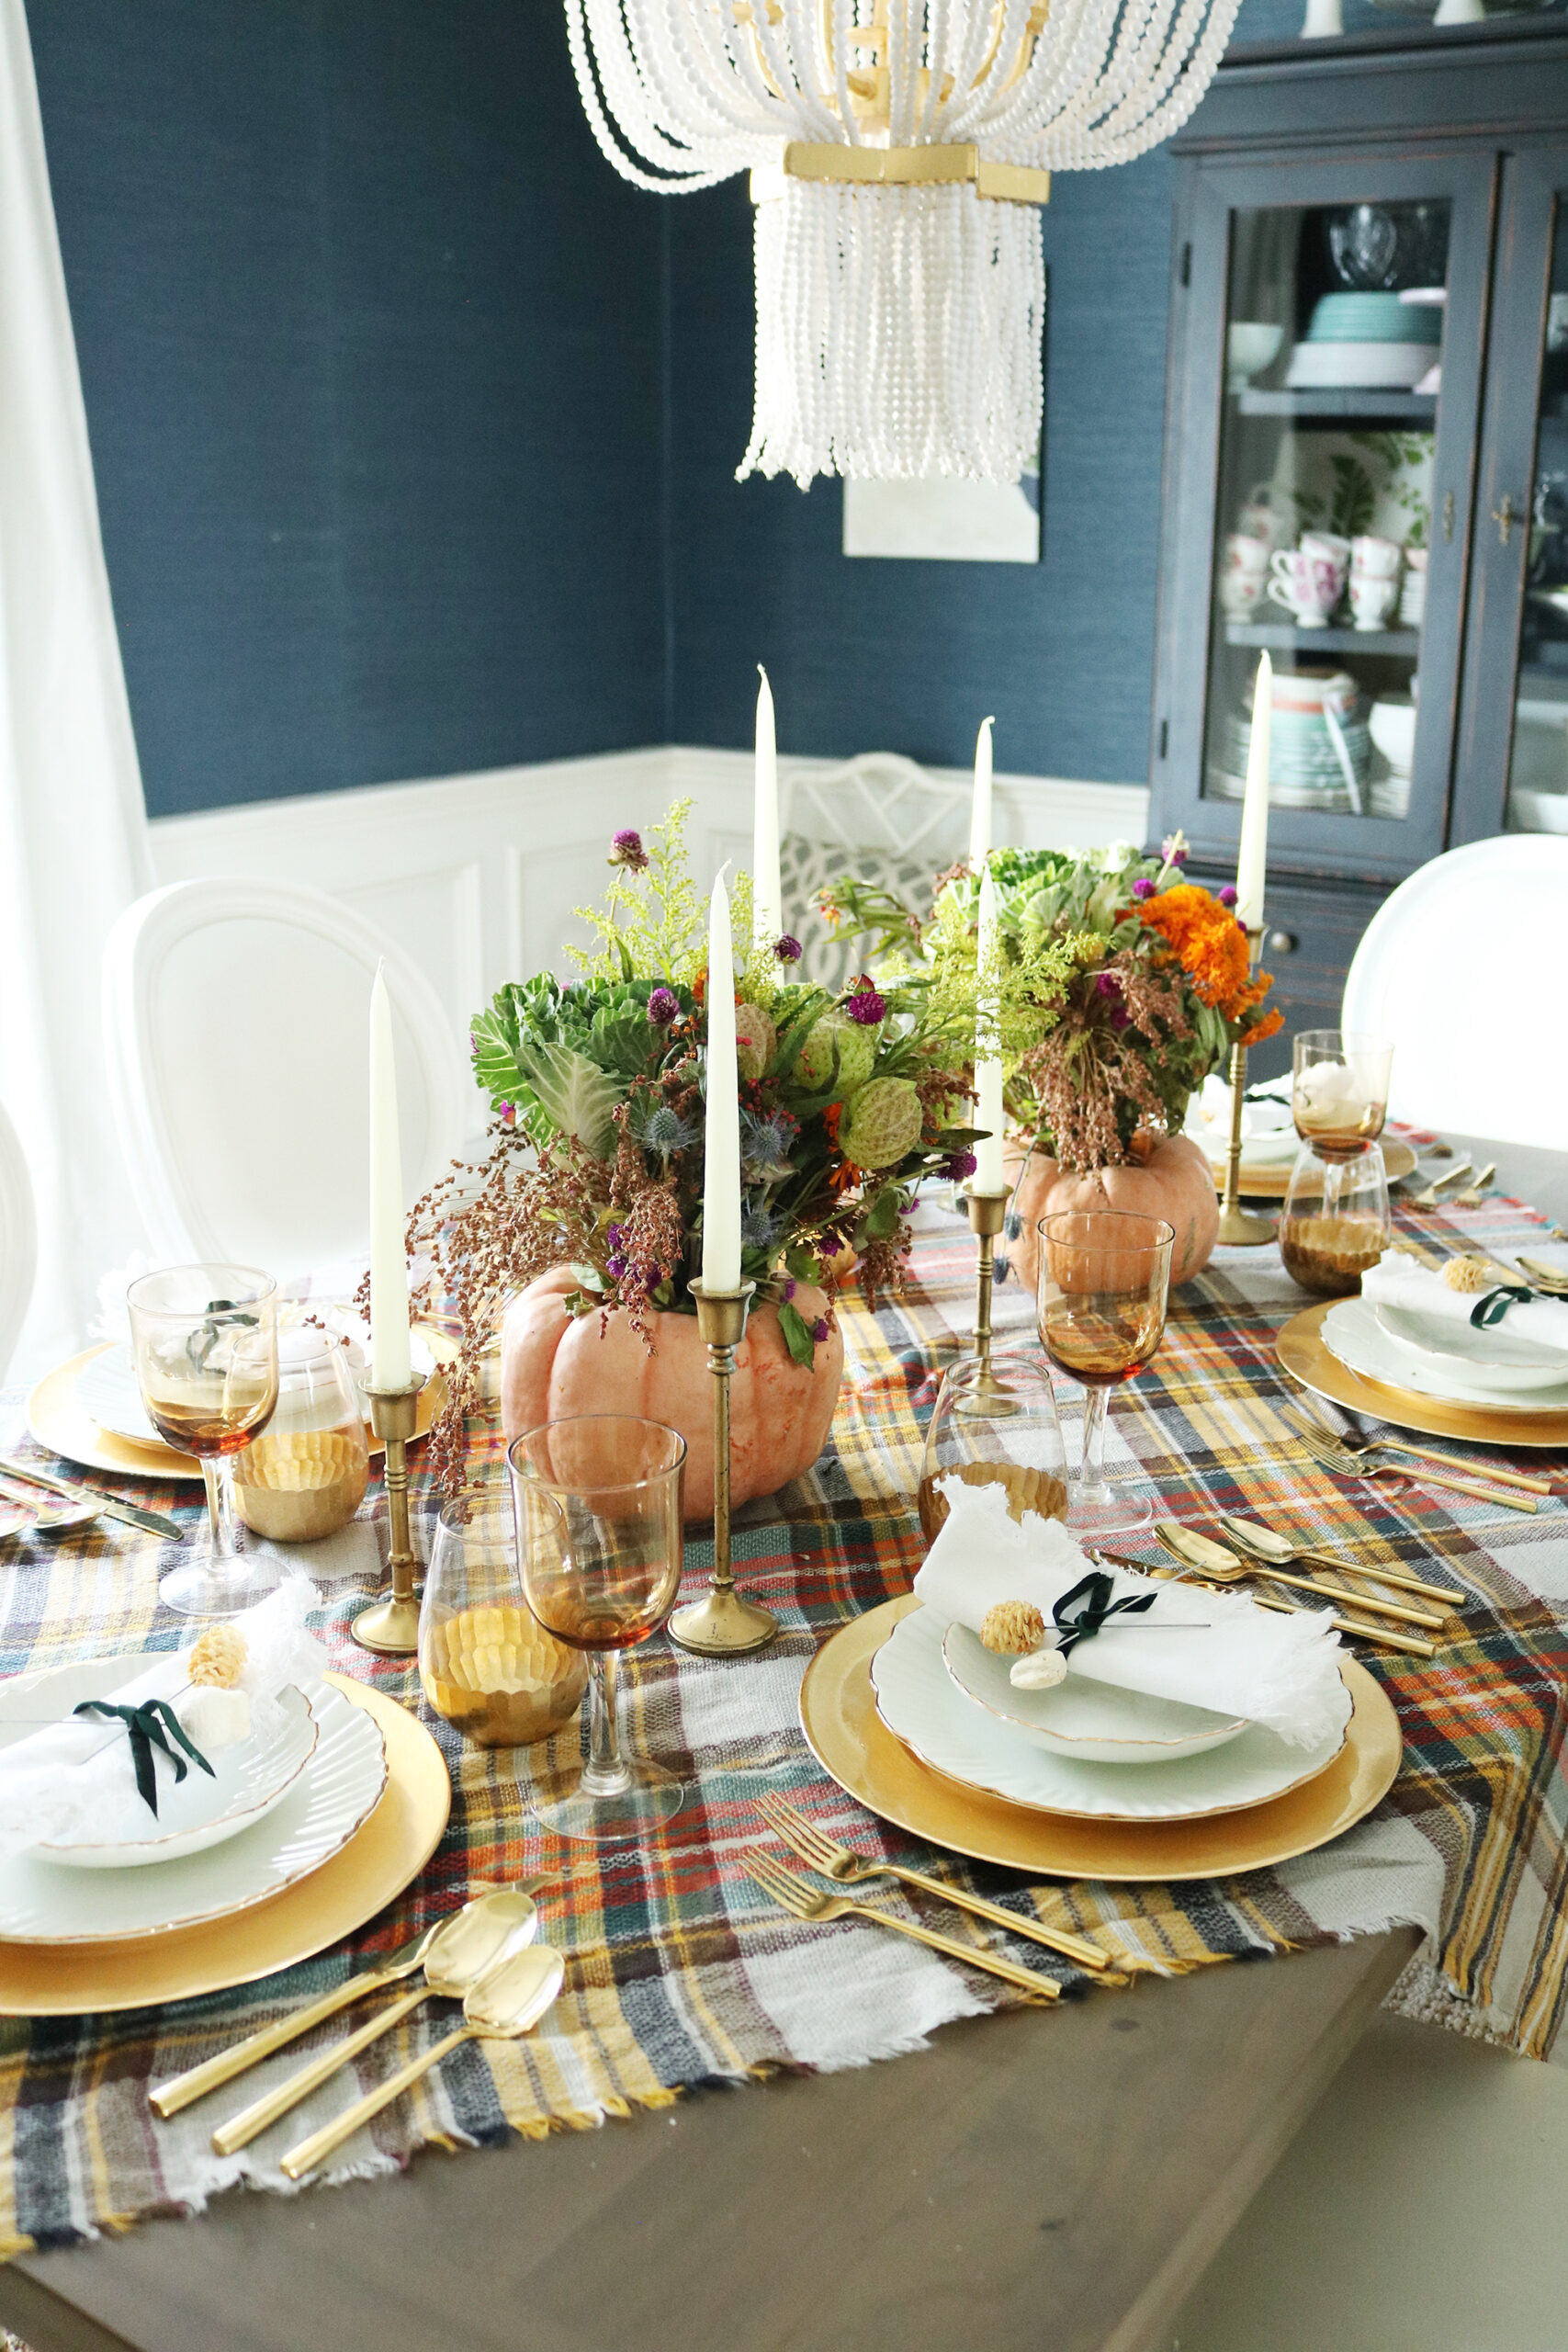 Bring a wow factor!Use your porch pumpkins as Flower Centerpieces for your Thanksgiving Table by making it a pumpkin gourd flower centerpiece. || Darleen Meier Top Lifestyle CT Blogger